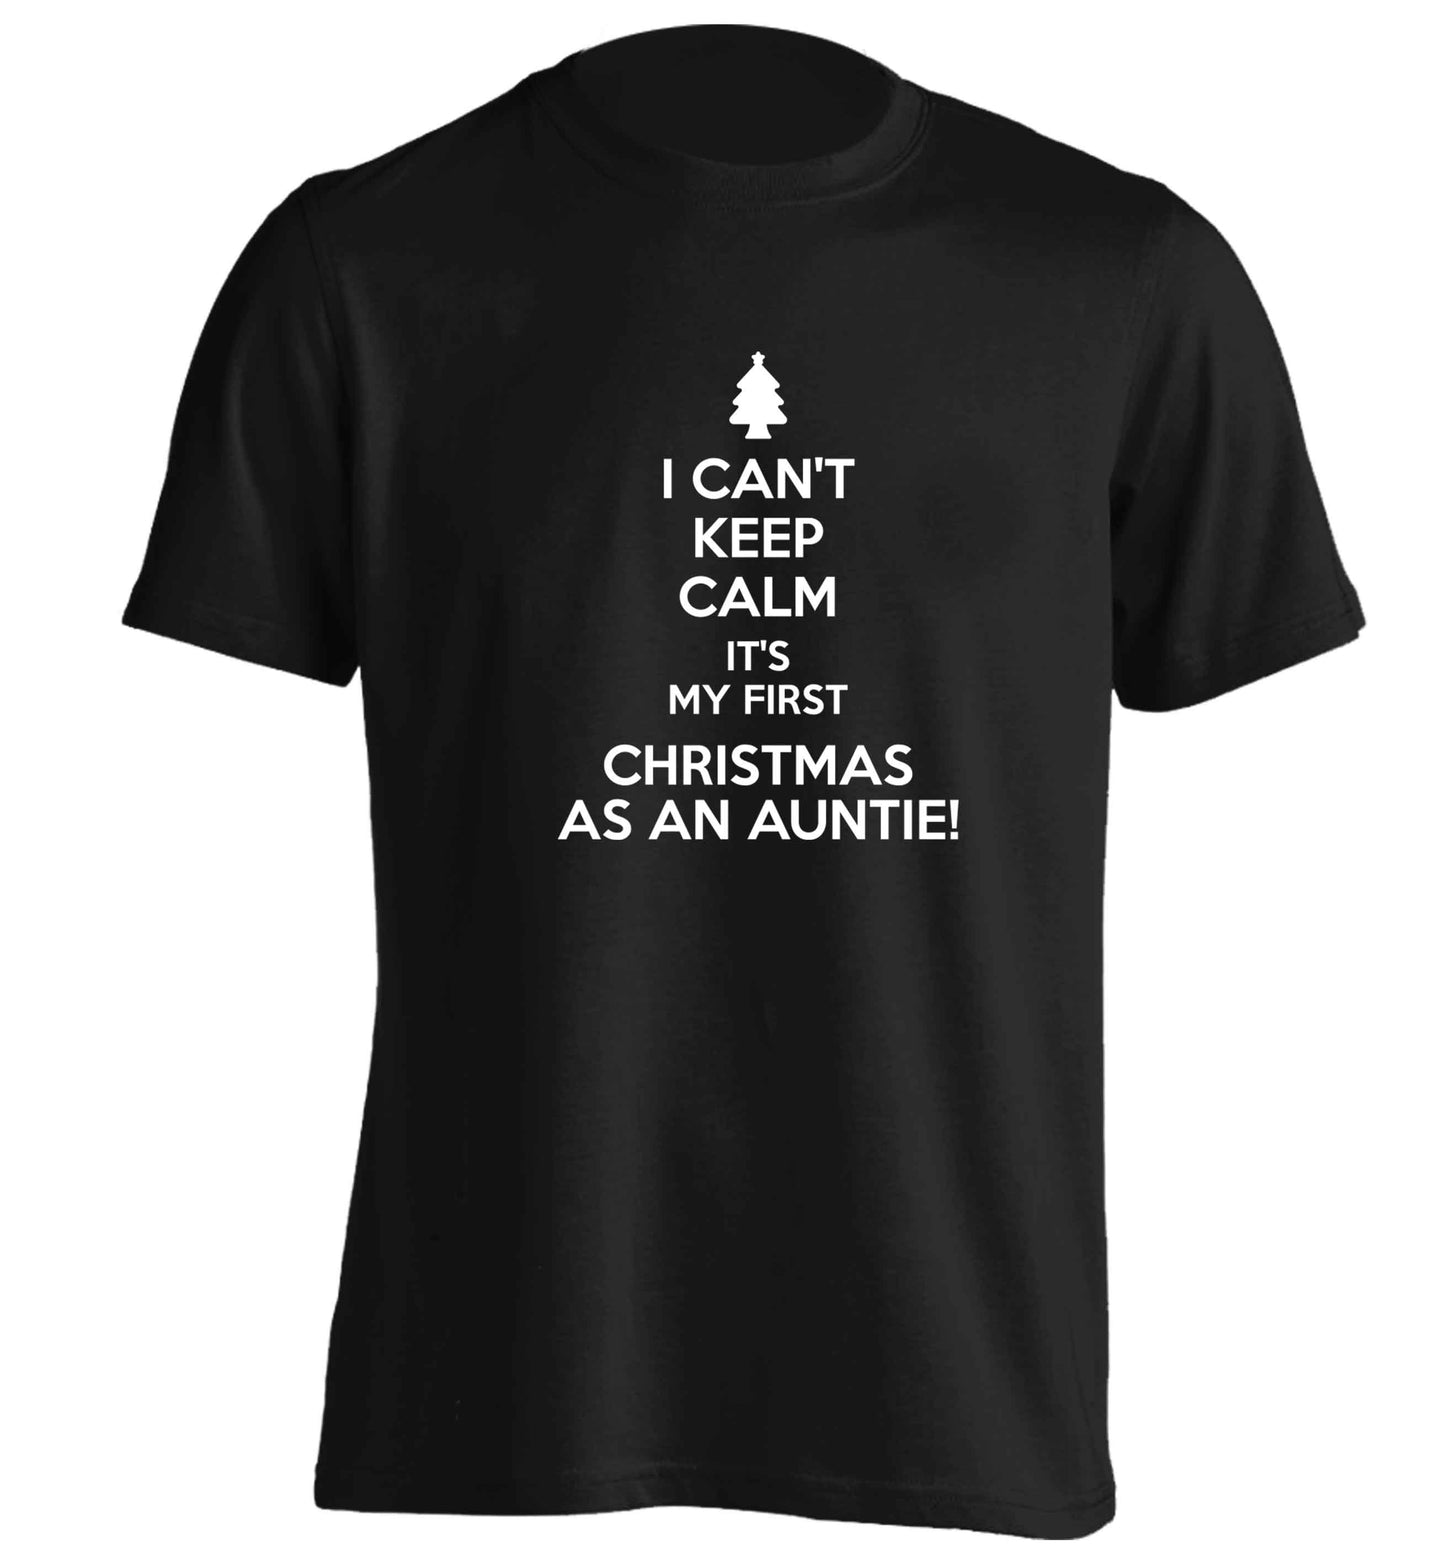 I can't keep calm it's my first Christmas as an auntie! adults unisex black Tshirt 2XL